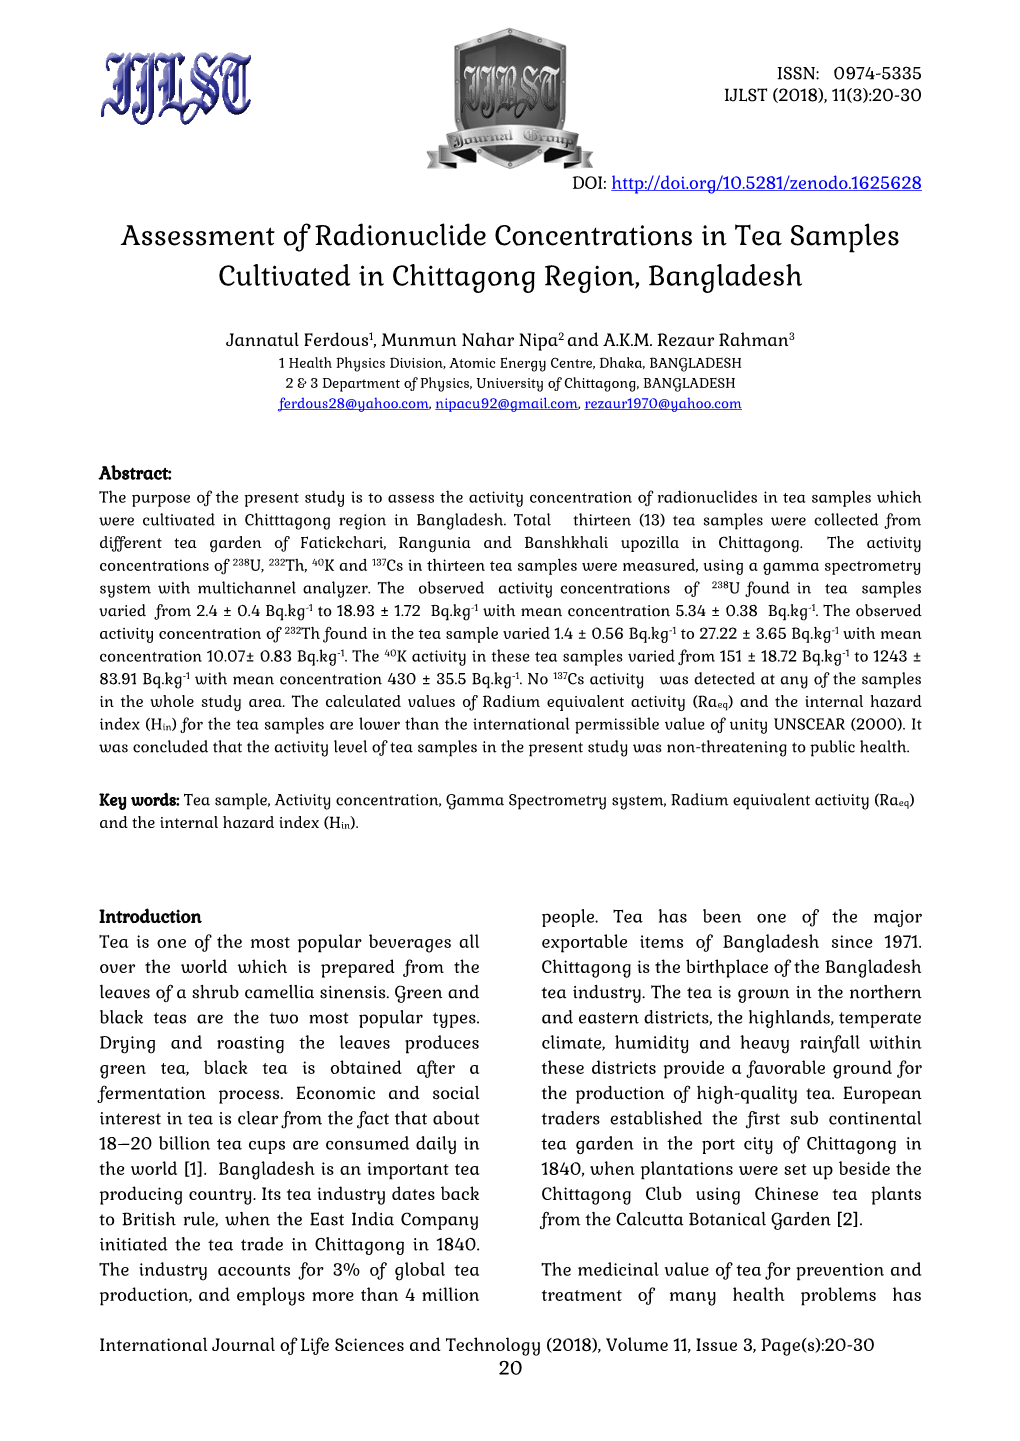 Assessment of Radionuclide Concentrations in Tea Samples Cultivated in Chittagong Region, Bangladesh